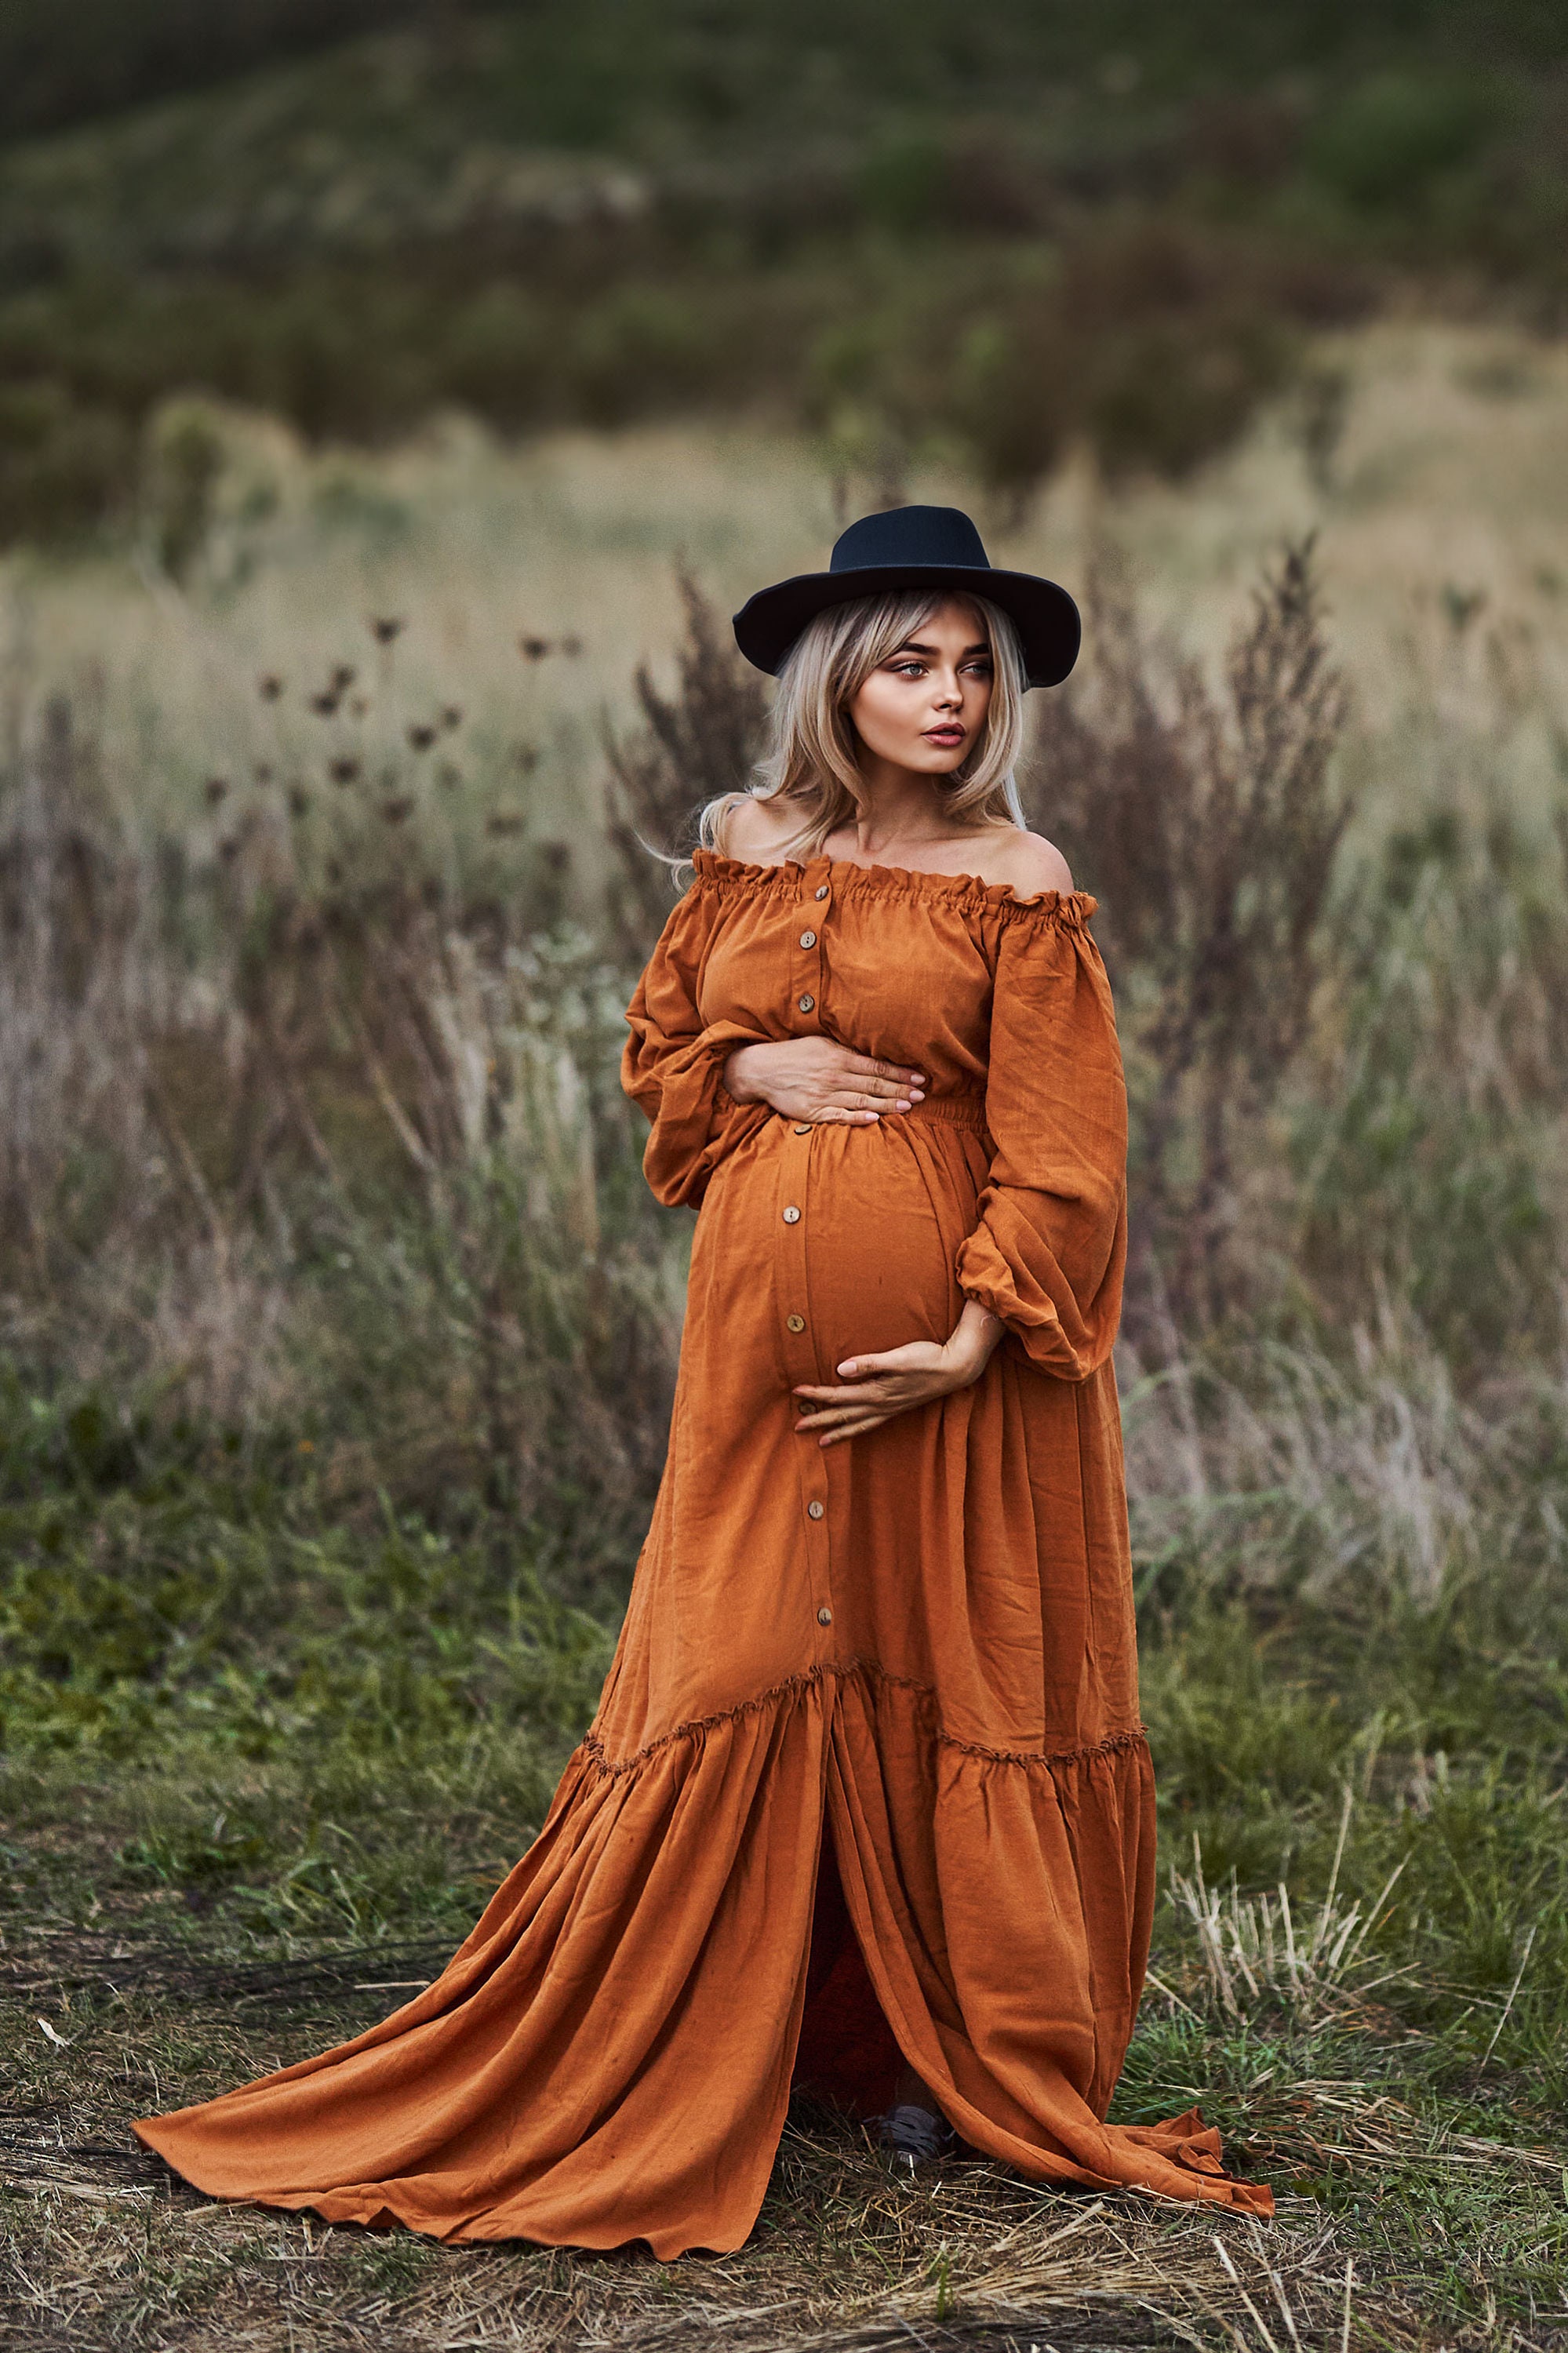 Maternity Dress for Photo Shoot, Flowy Boho Photography Gown, Two Piece  Dress 